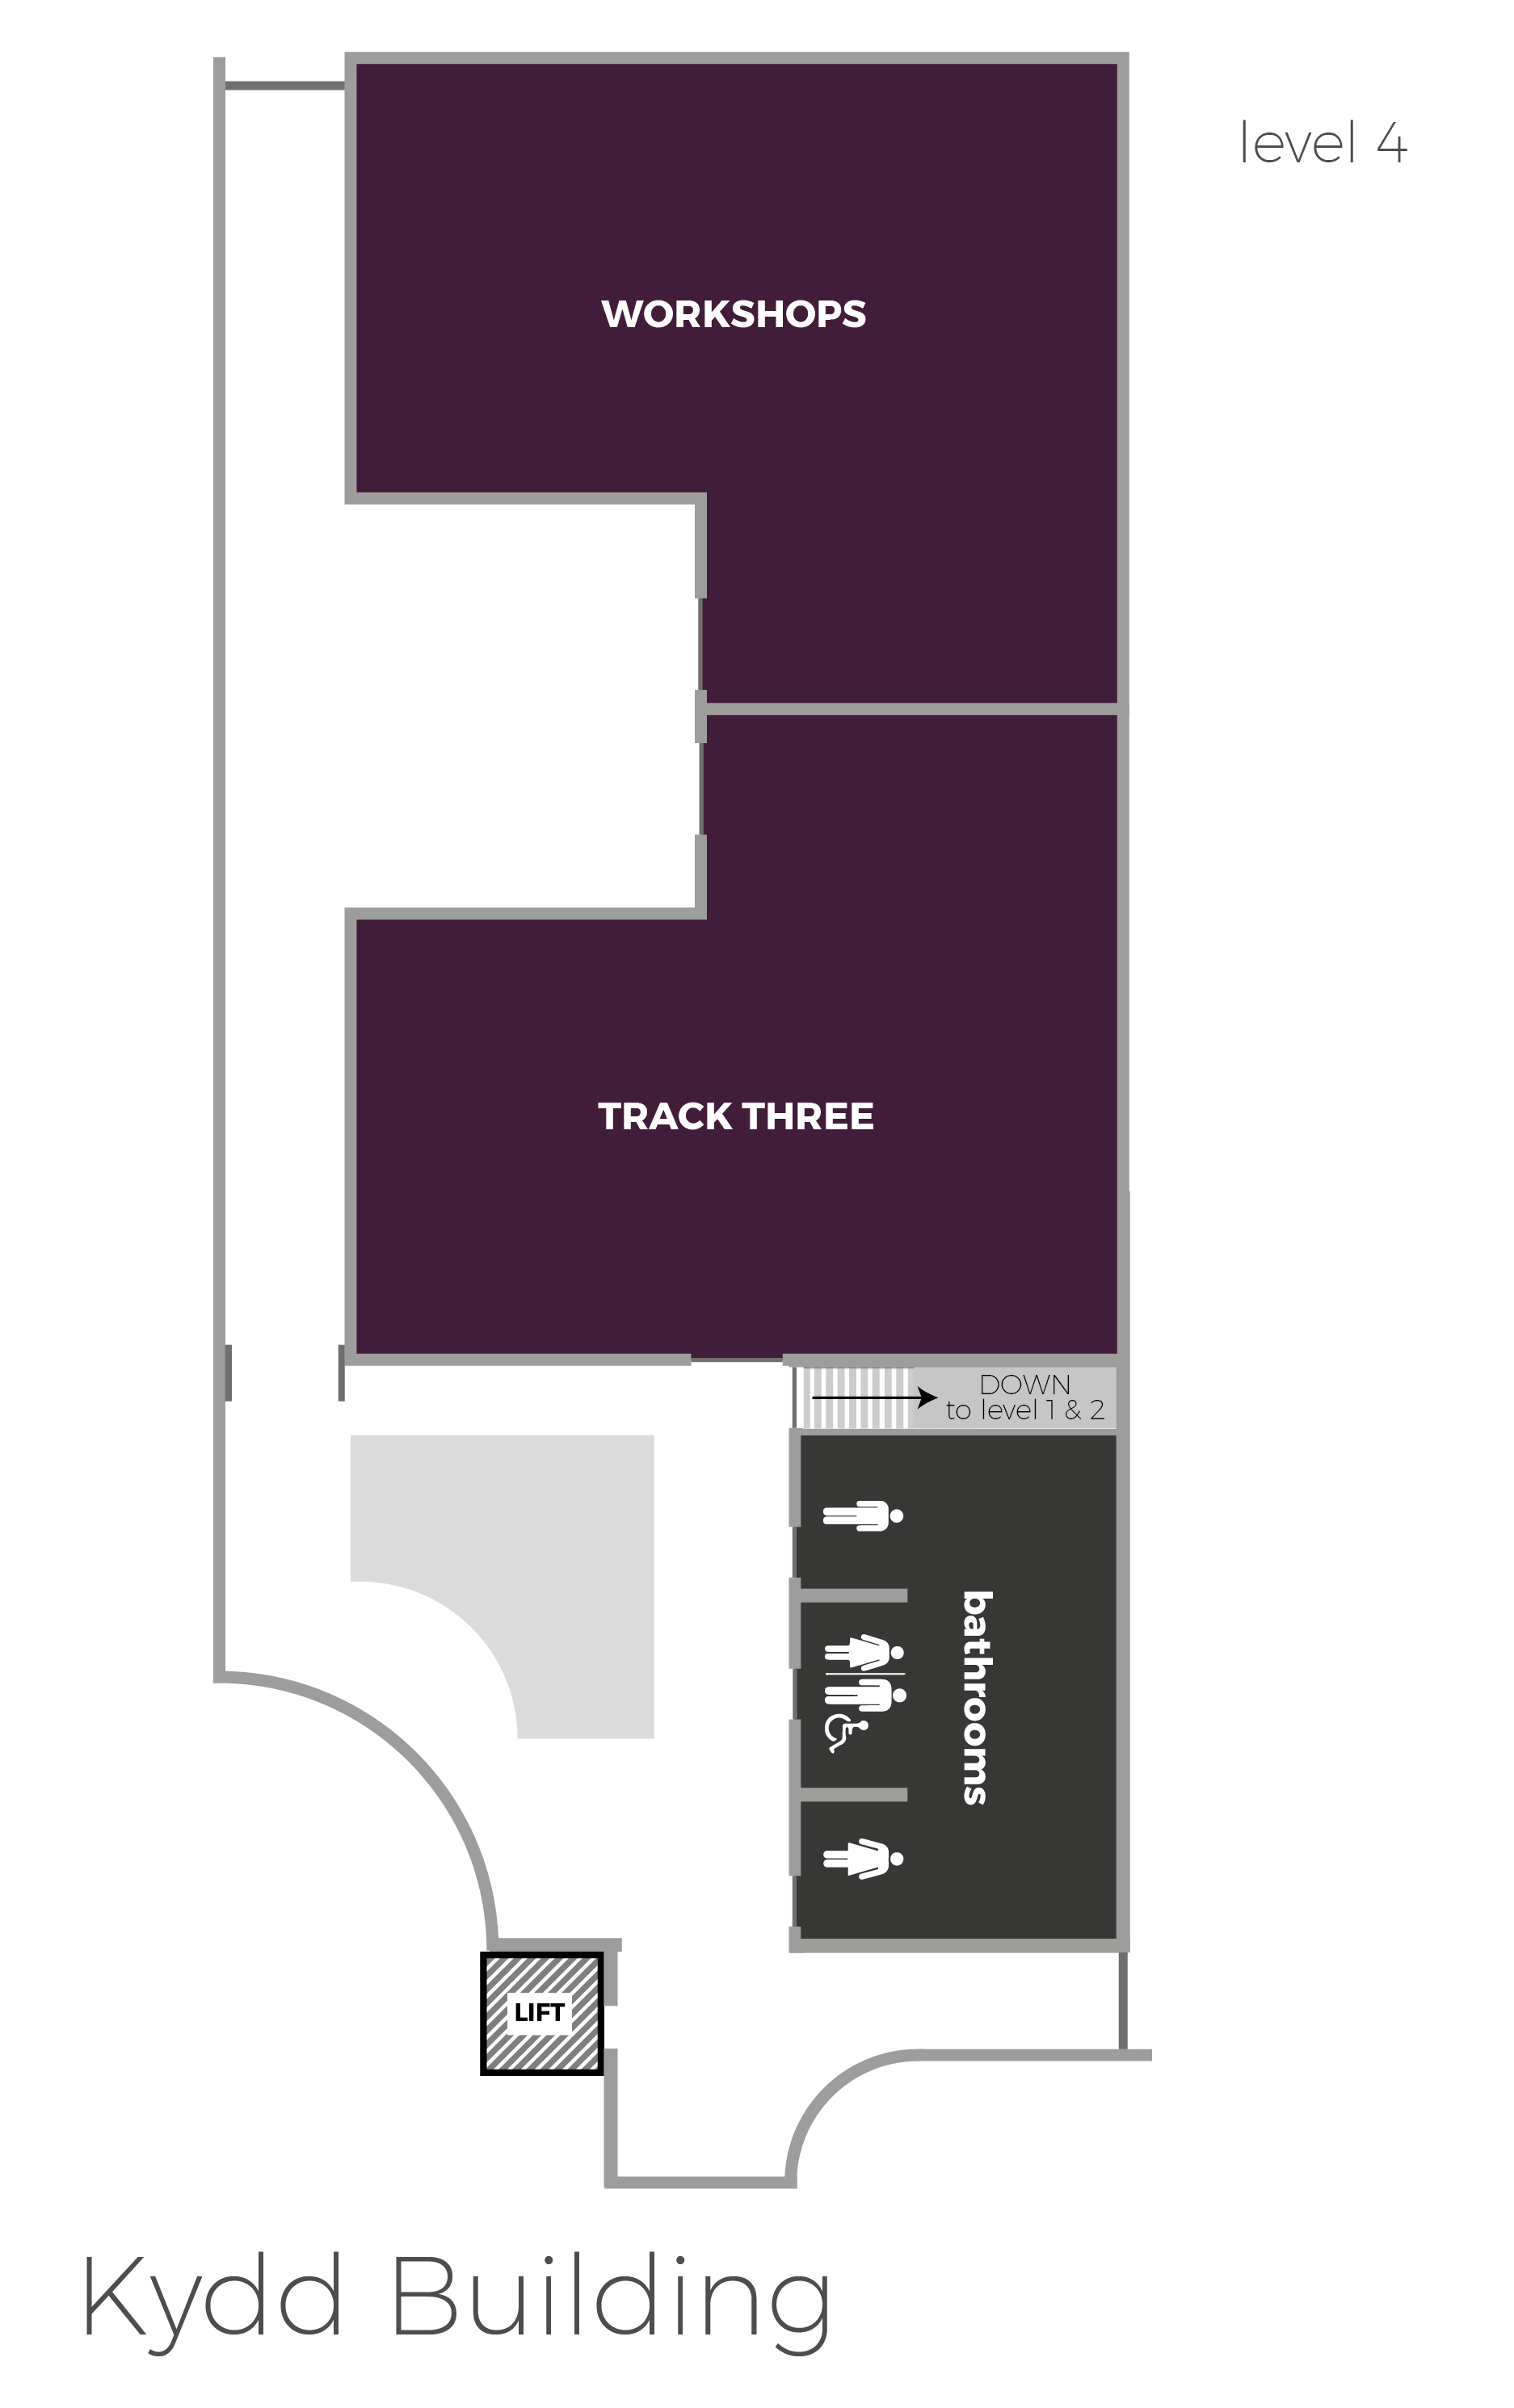 Map of the Kydd Building Level 4